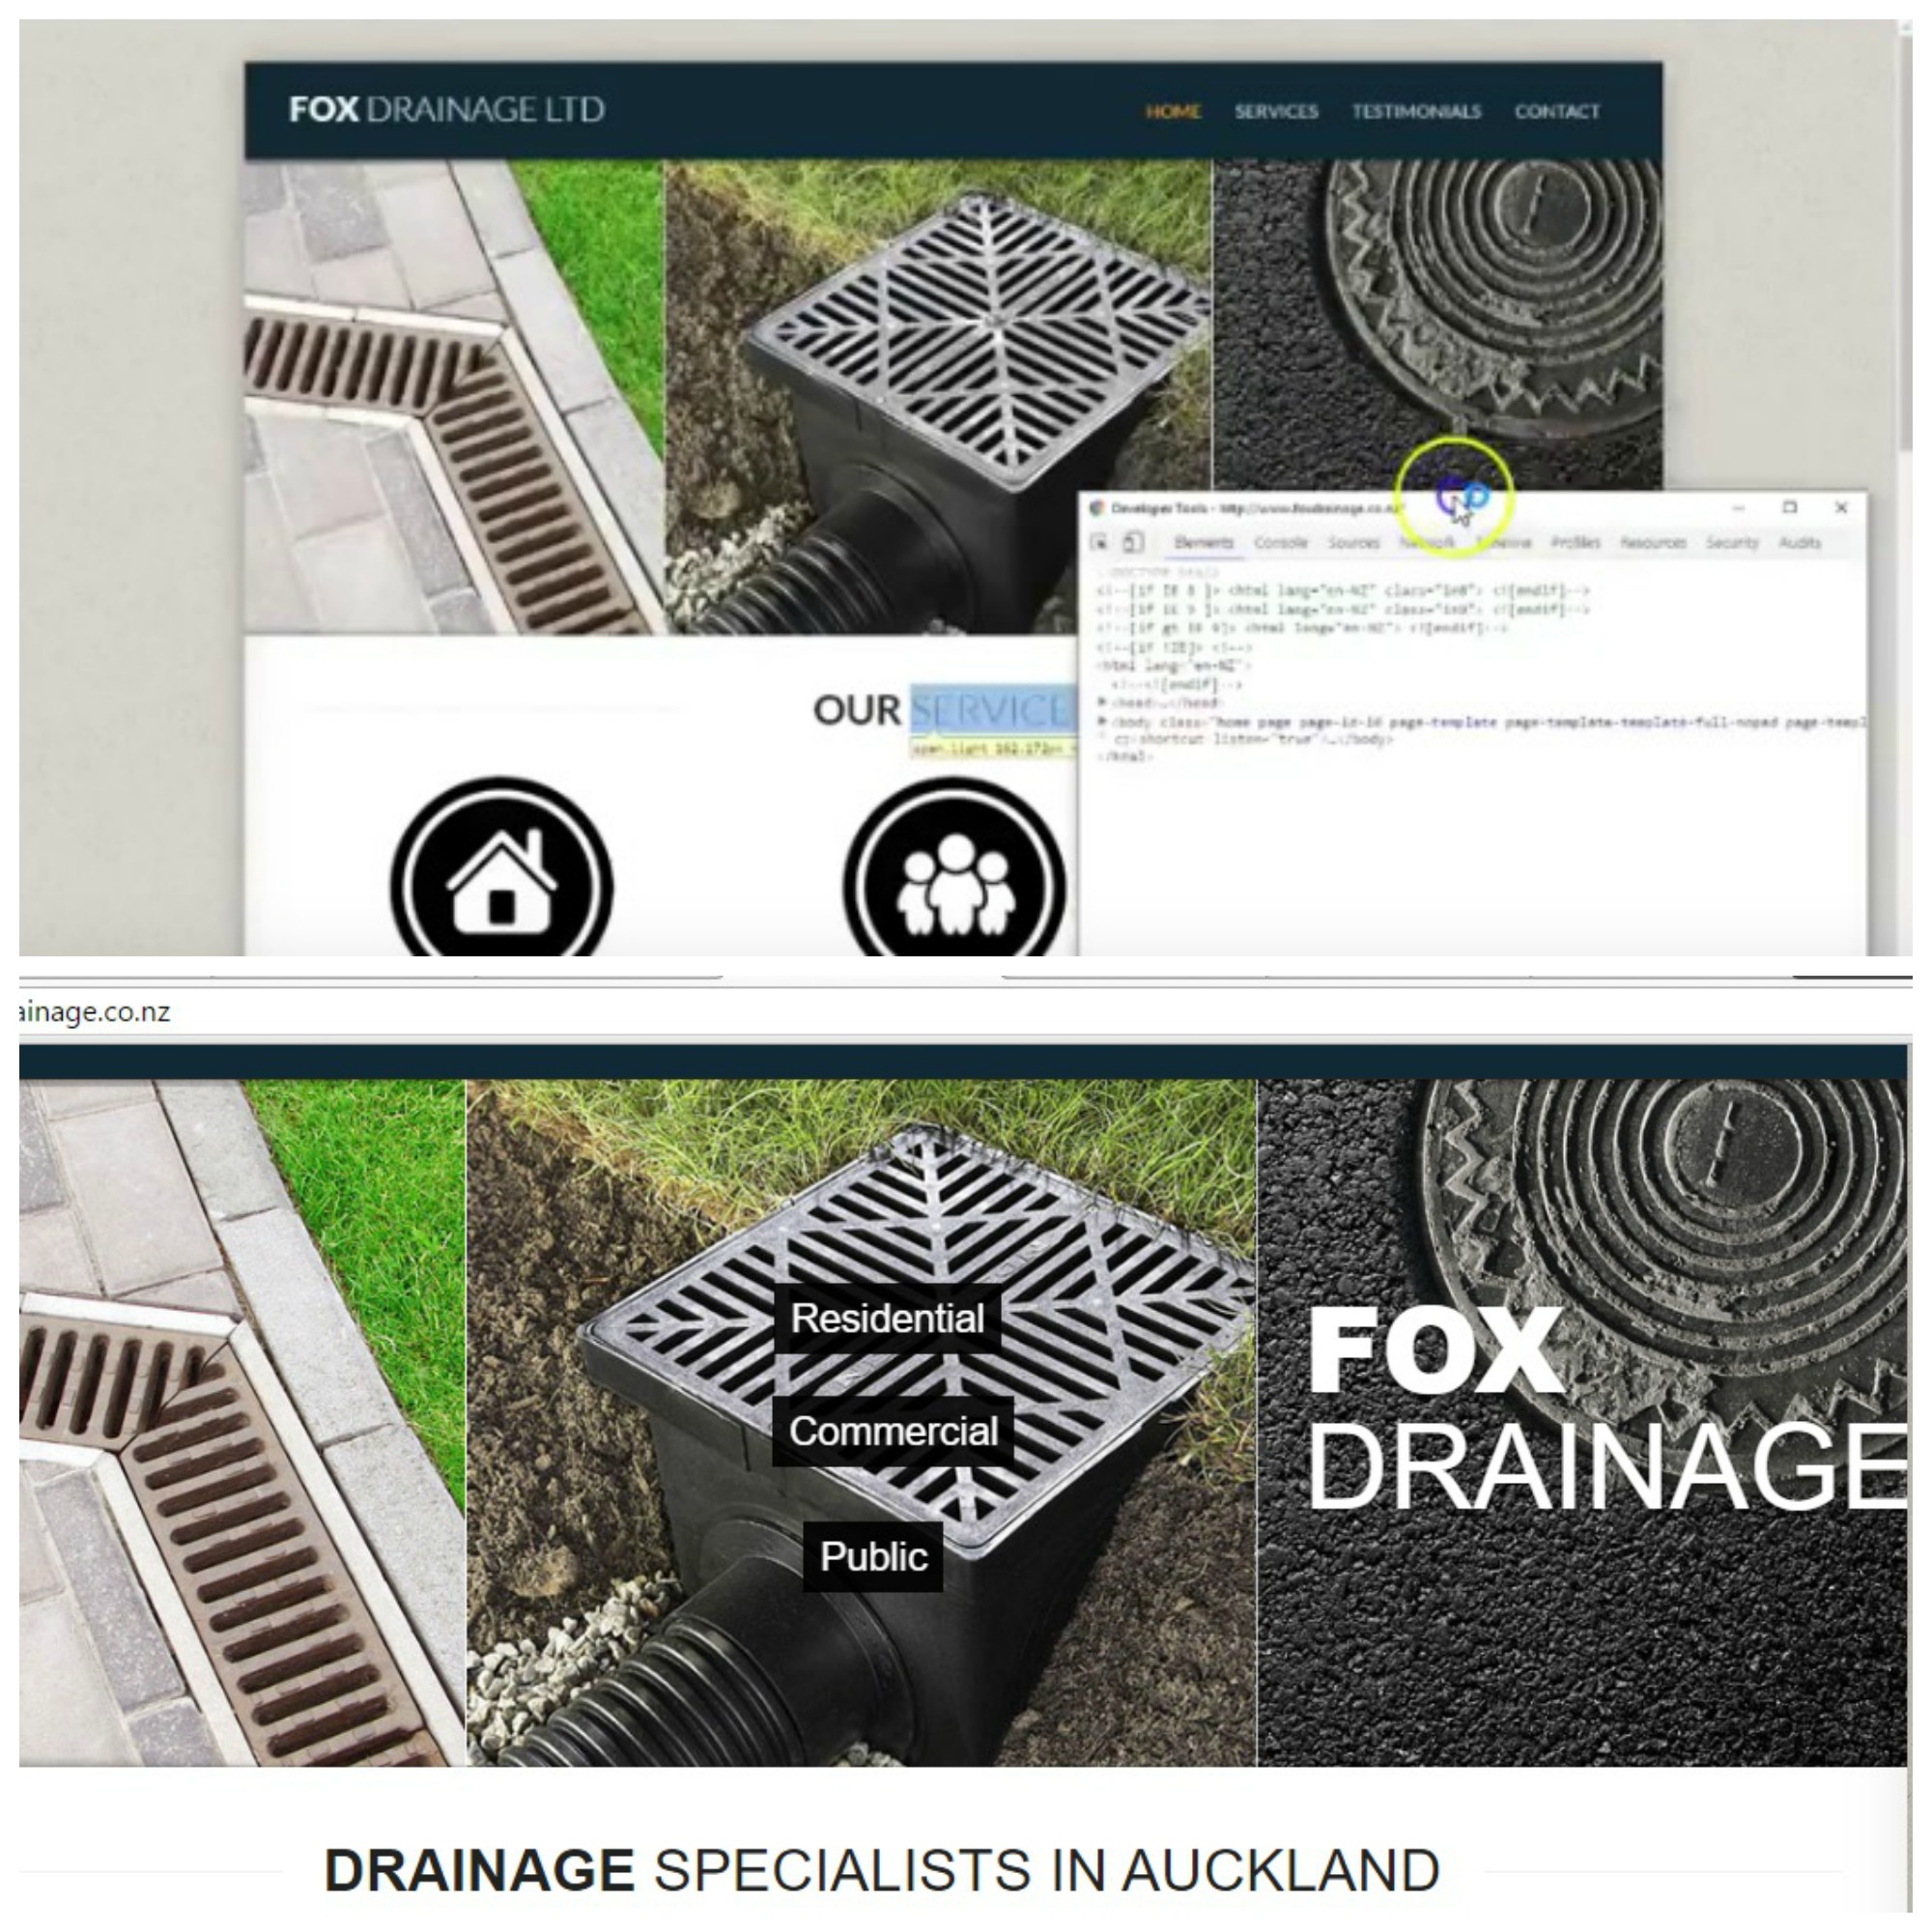 Fixing a Leaky Drainage Website